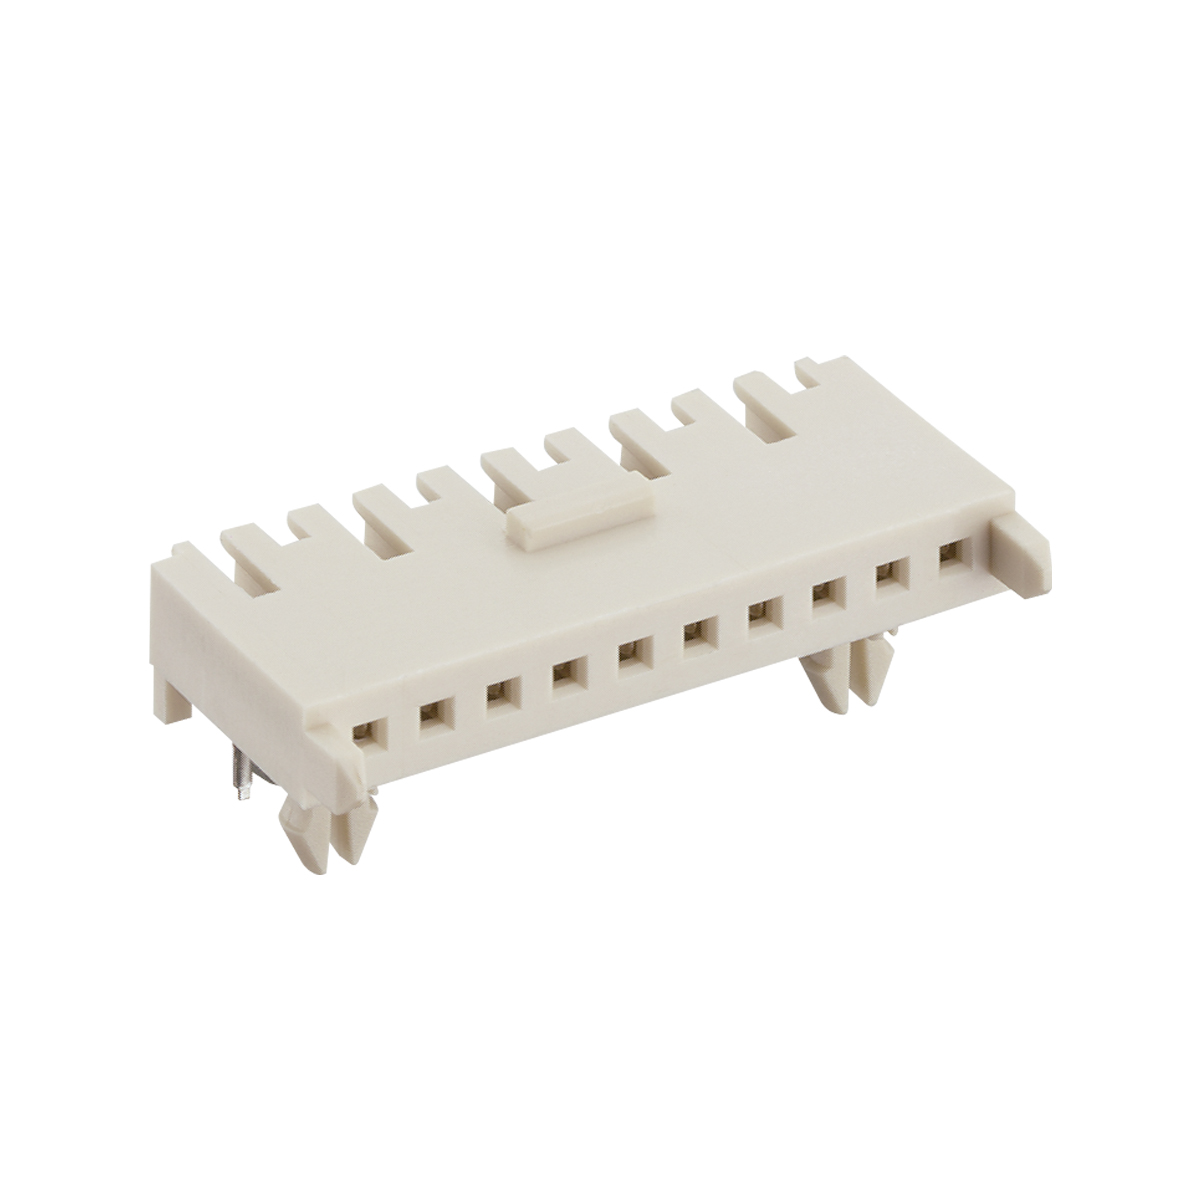 Lumberg: 3801 (Series 38 | Multimodul™ connectors, pitch 2.5 mm)